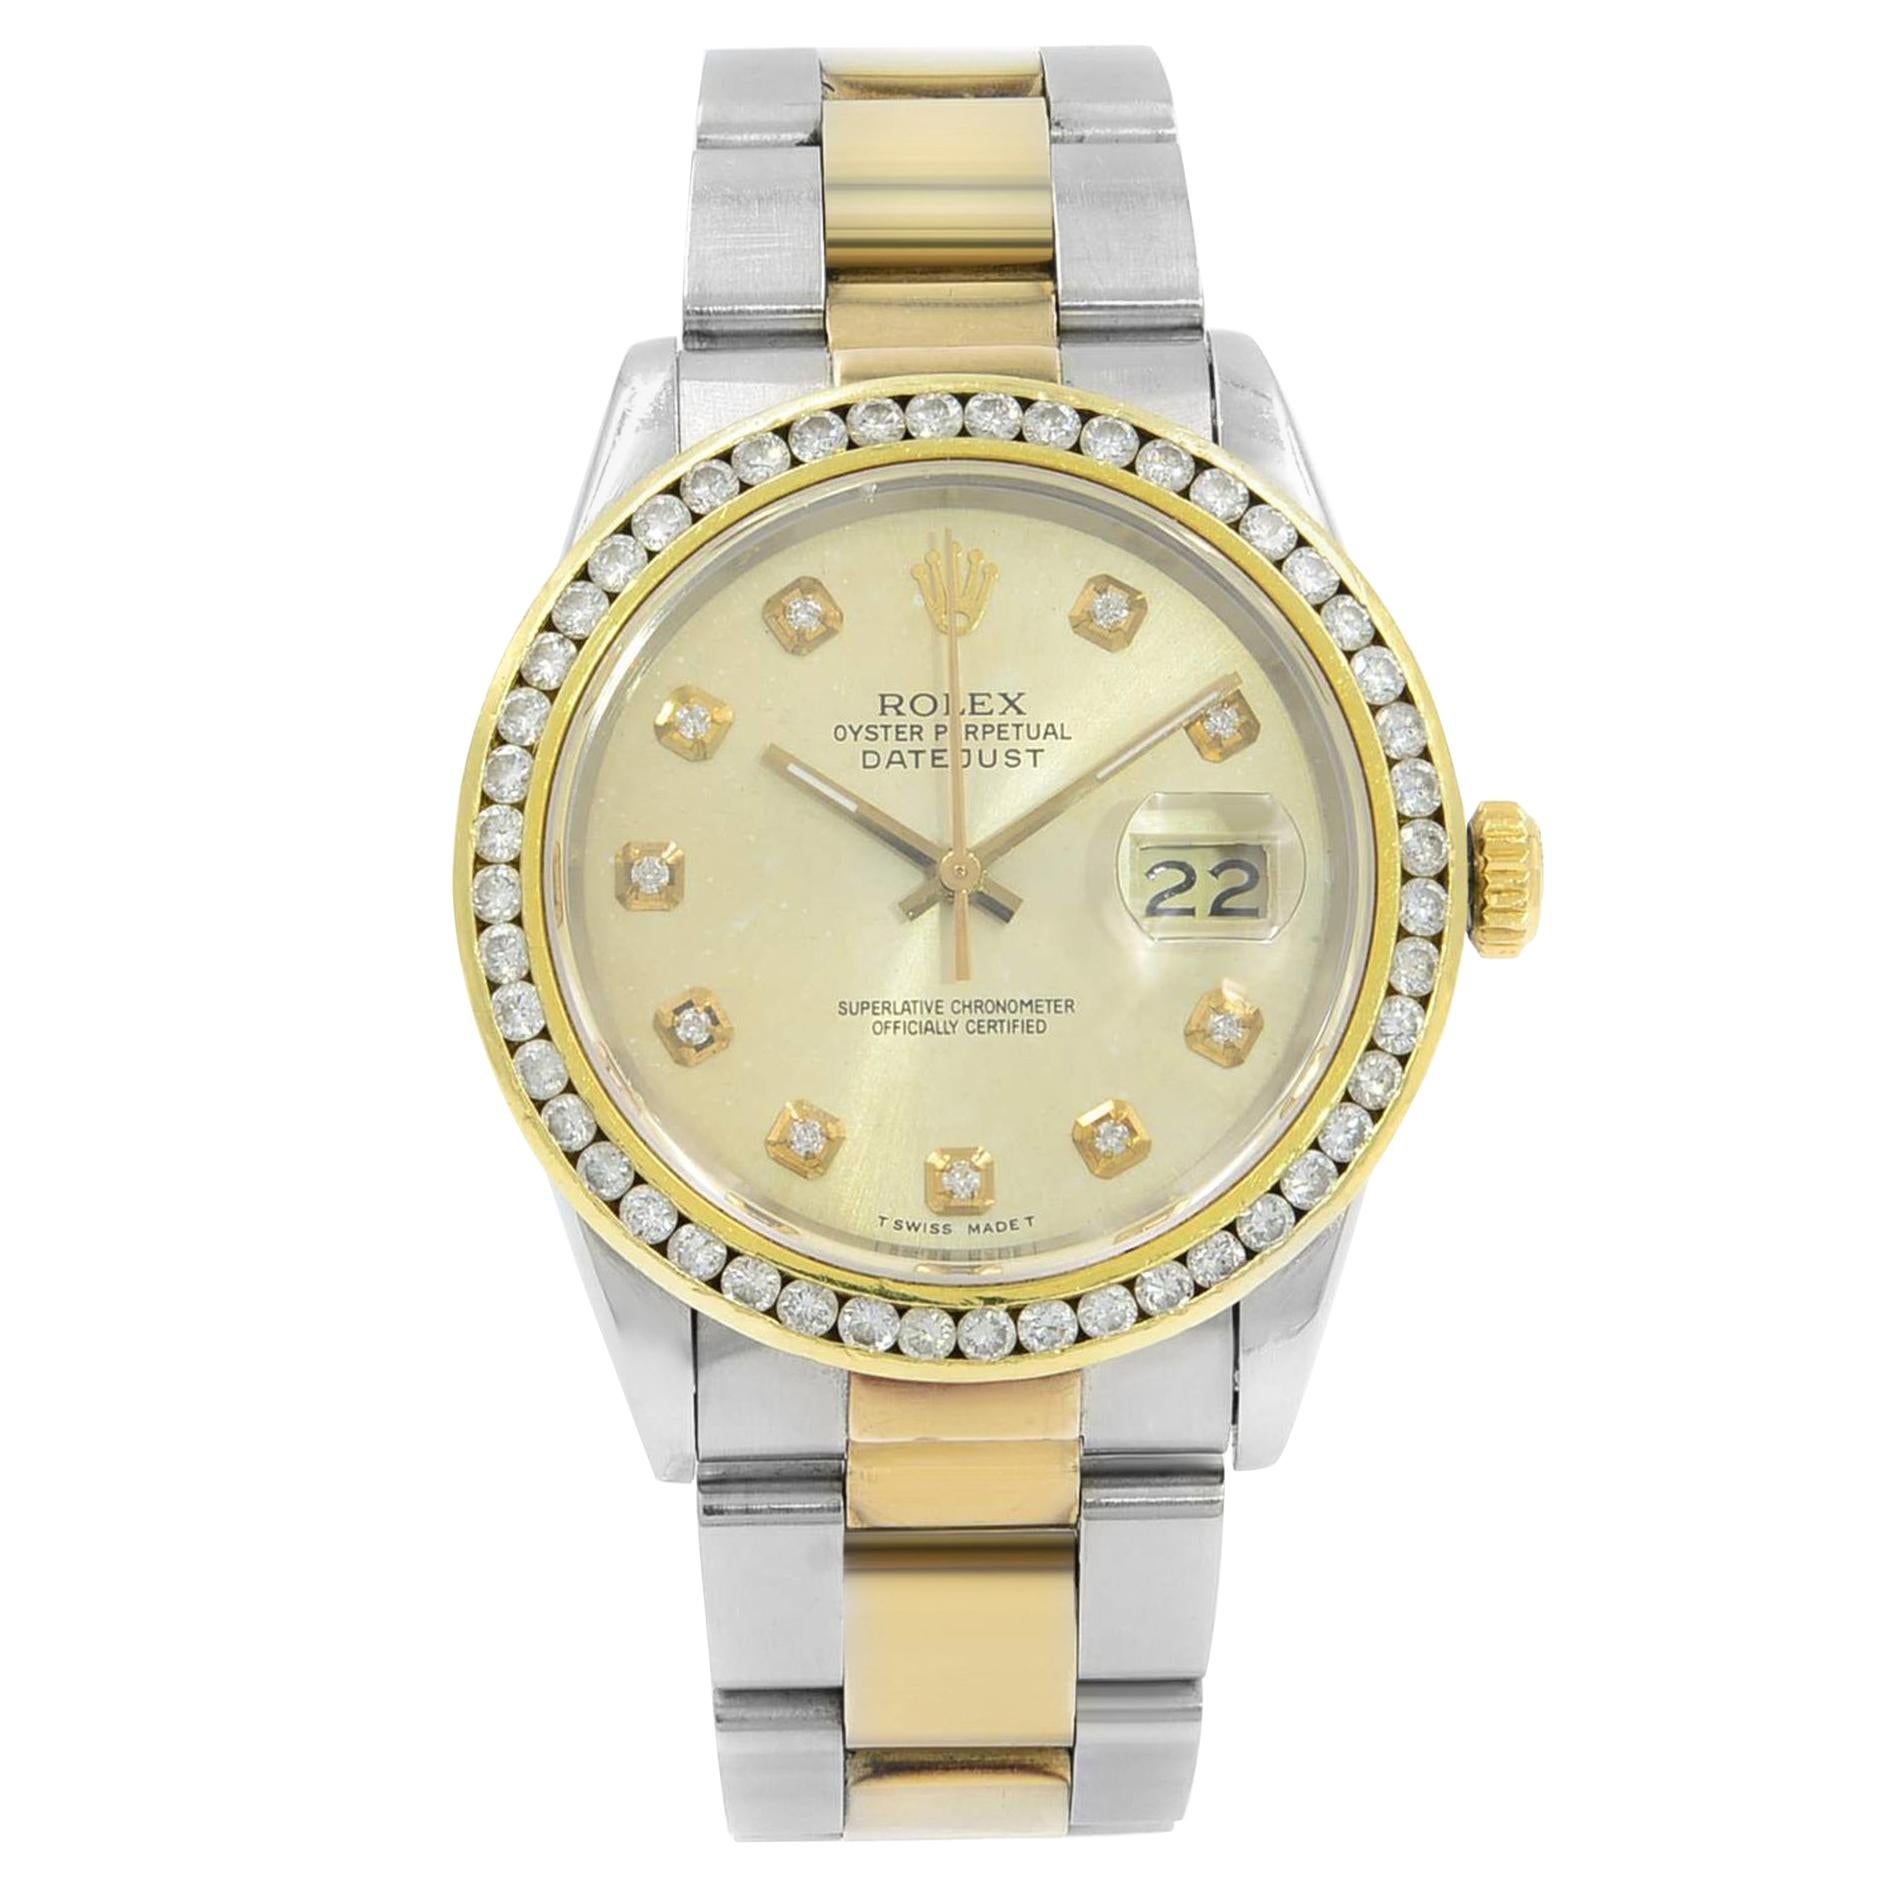 Rolex Datejust 16233 Champagne Dial Steel & 18K Yellow Gold Automatic Mens Watch